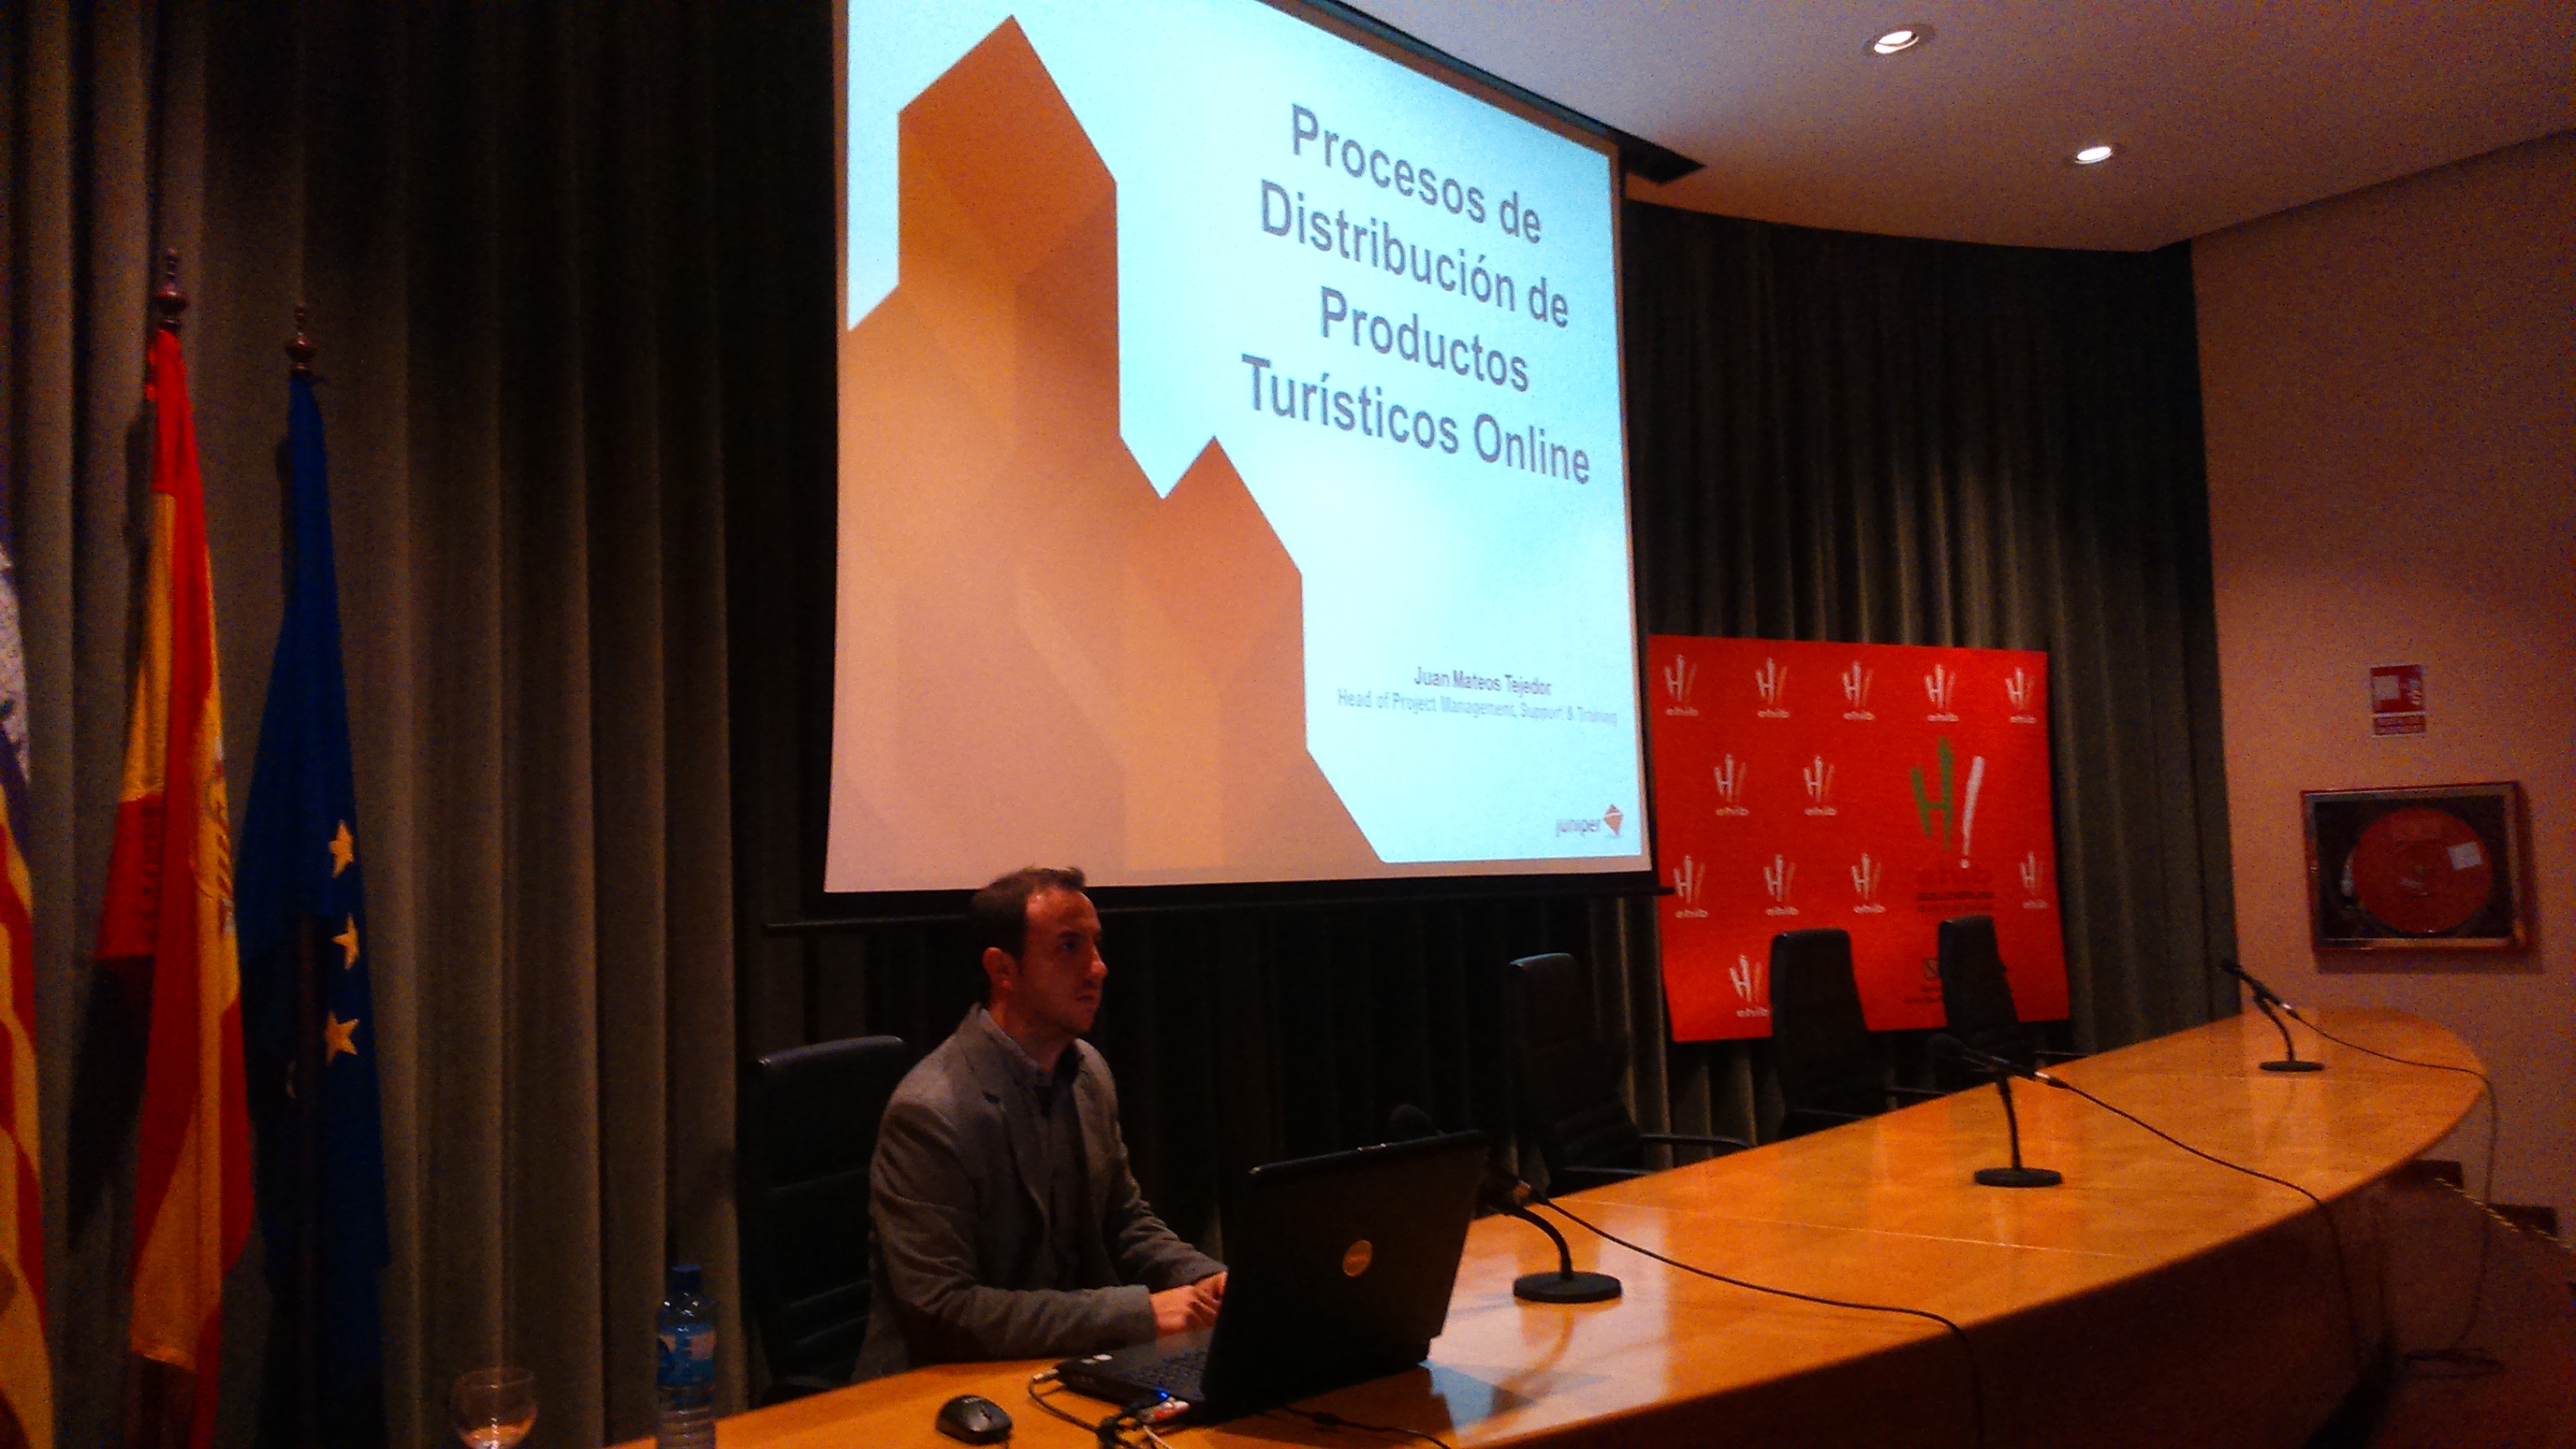 Juan Mateos speaks at the Faculty of Hospitality and Tourism